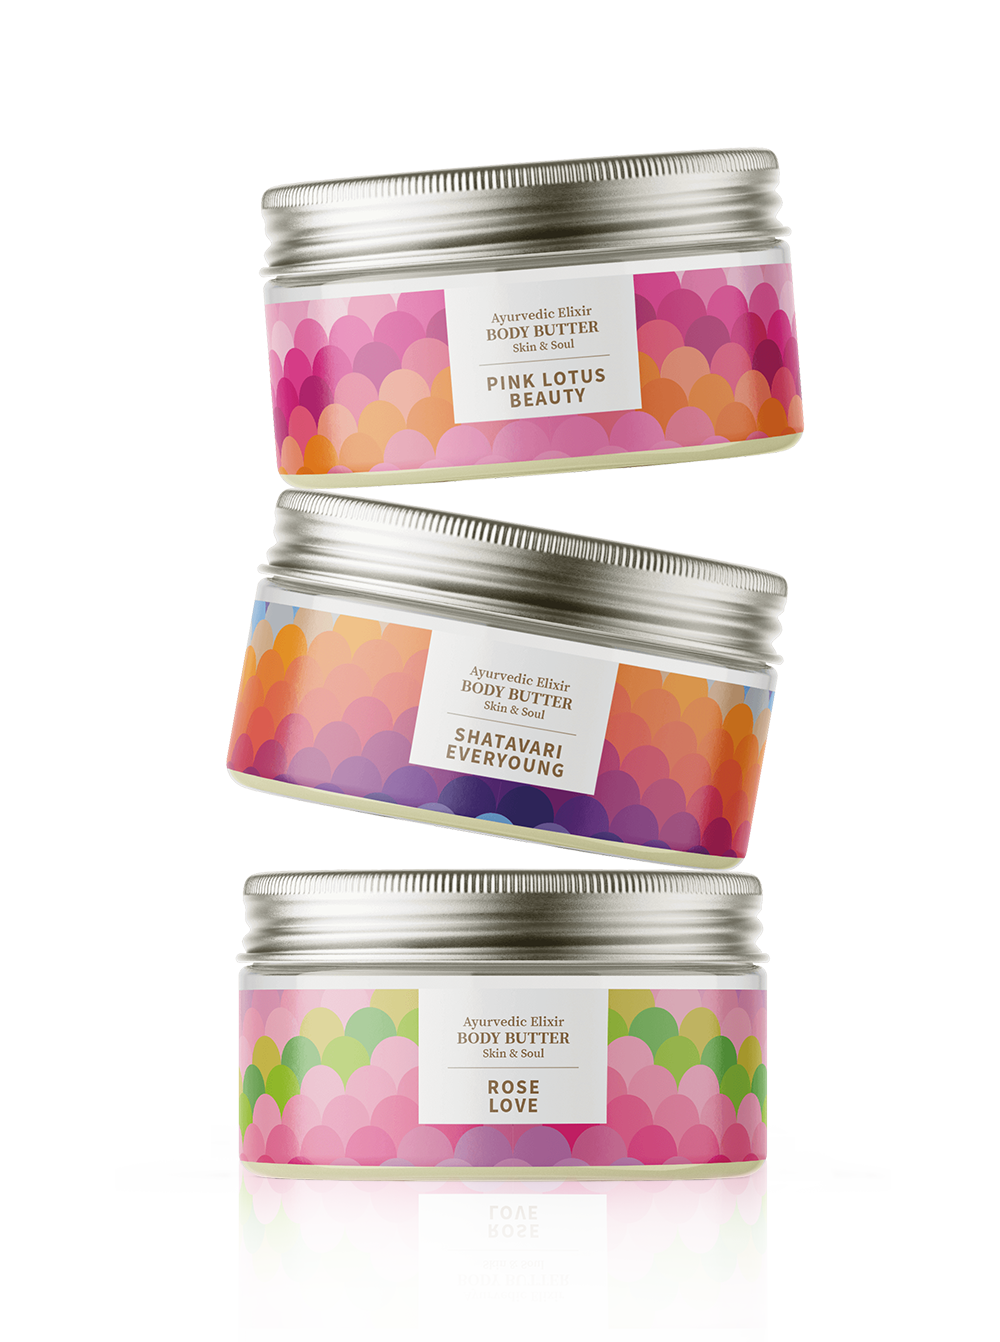 THE HOLY BODY BUTTER COLLECTION SVASTHYA